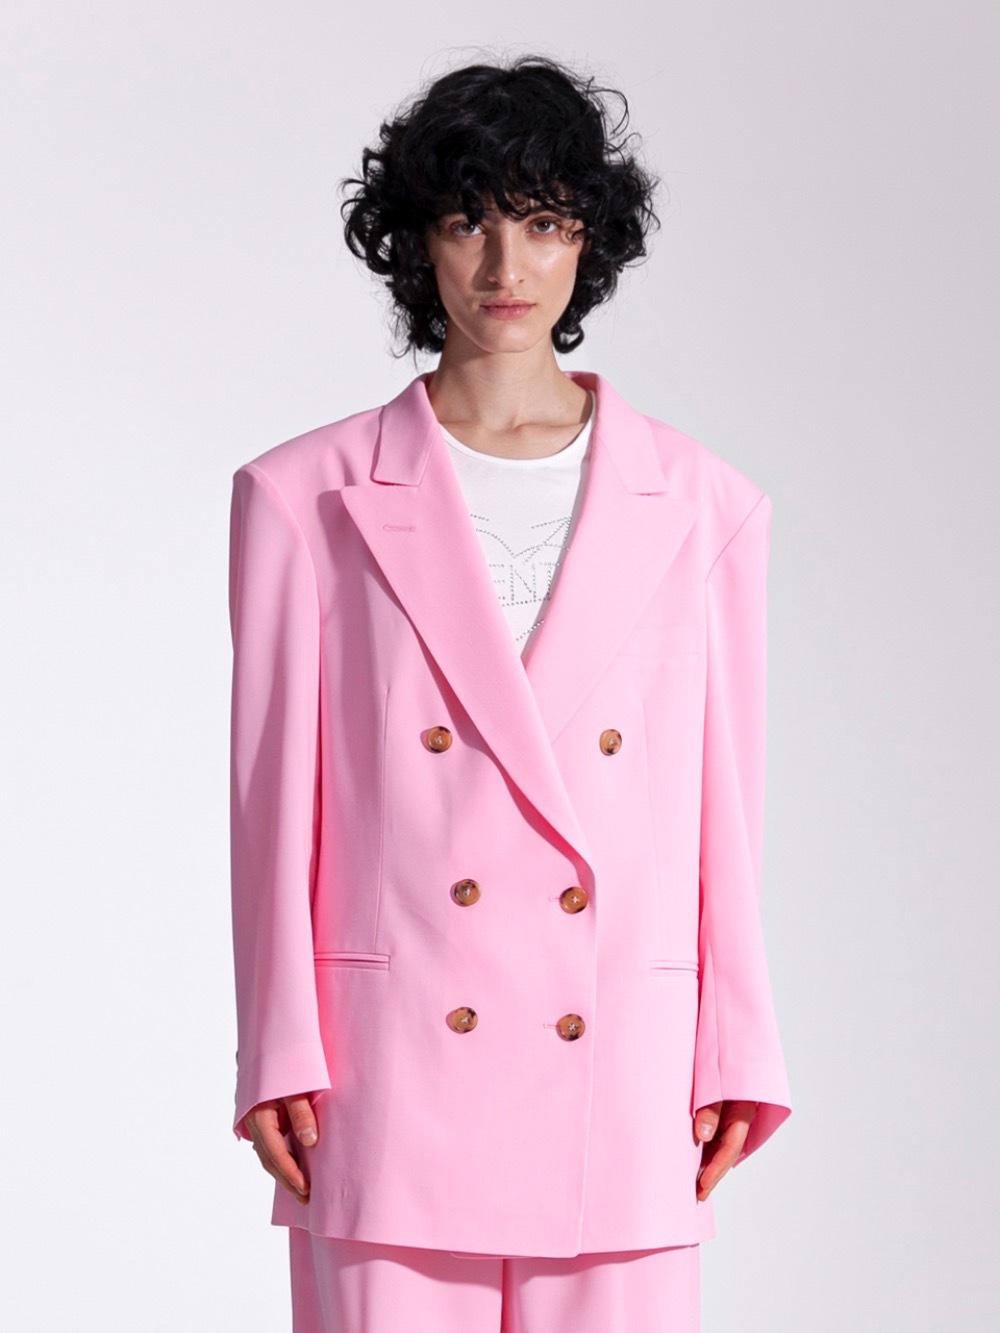 Cool pink double-breasted jacket